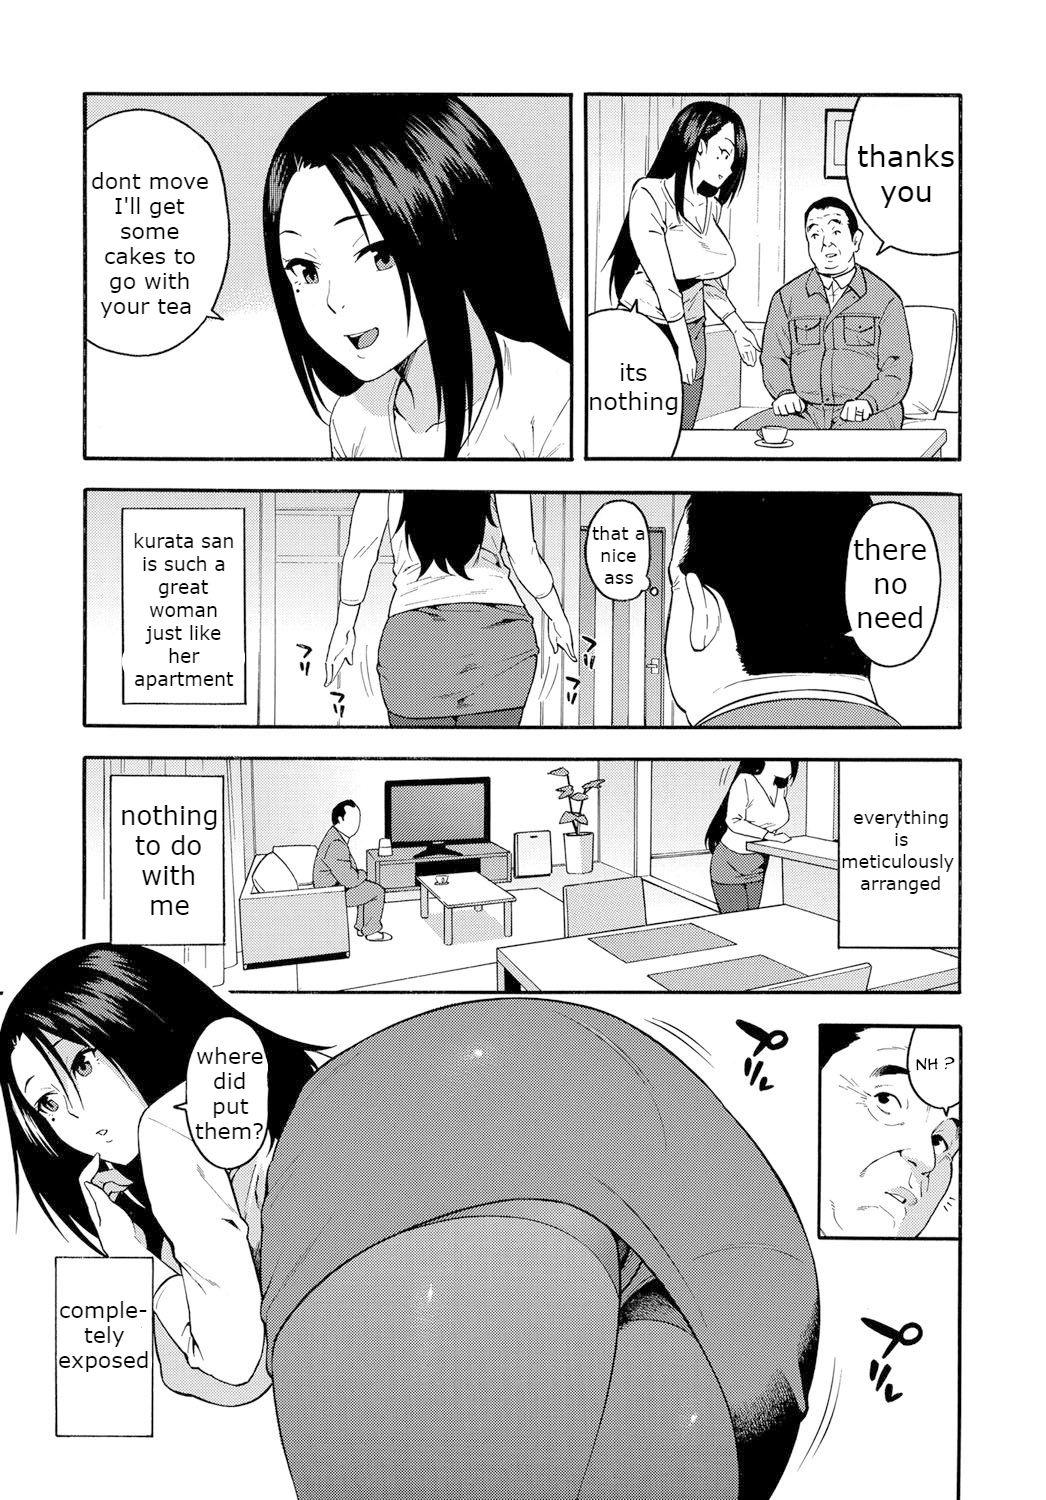 Face 15-nengo no Onna | The girl from 15 years ago Speculum - Page 5